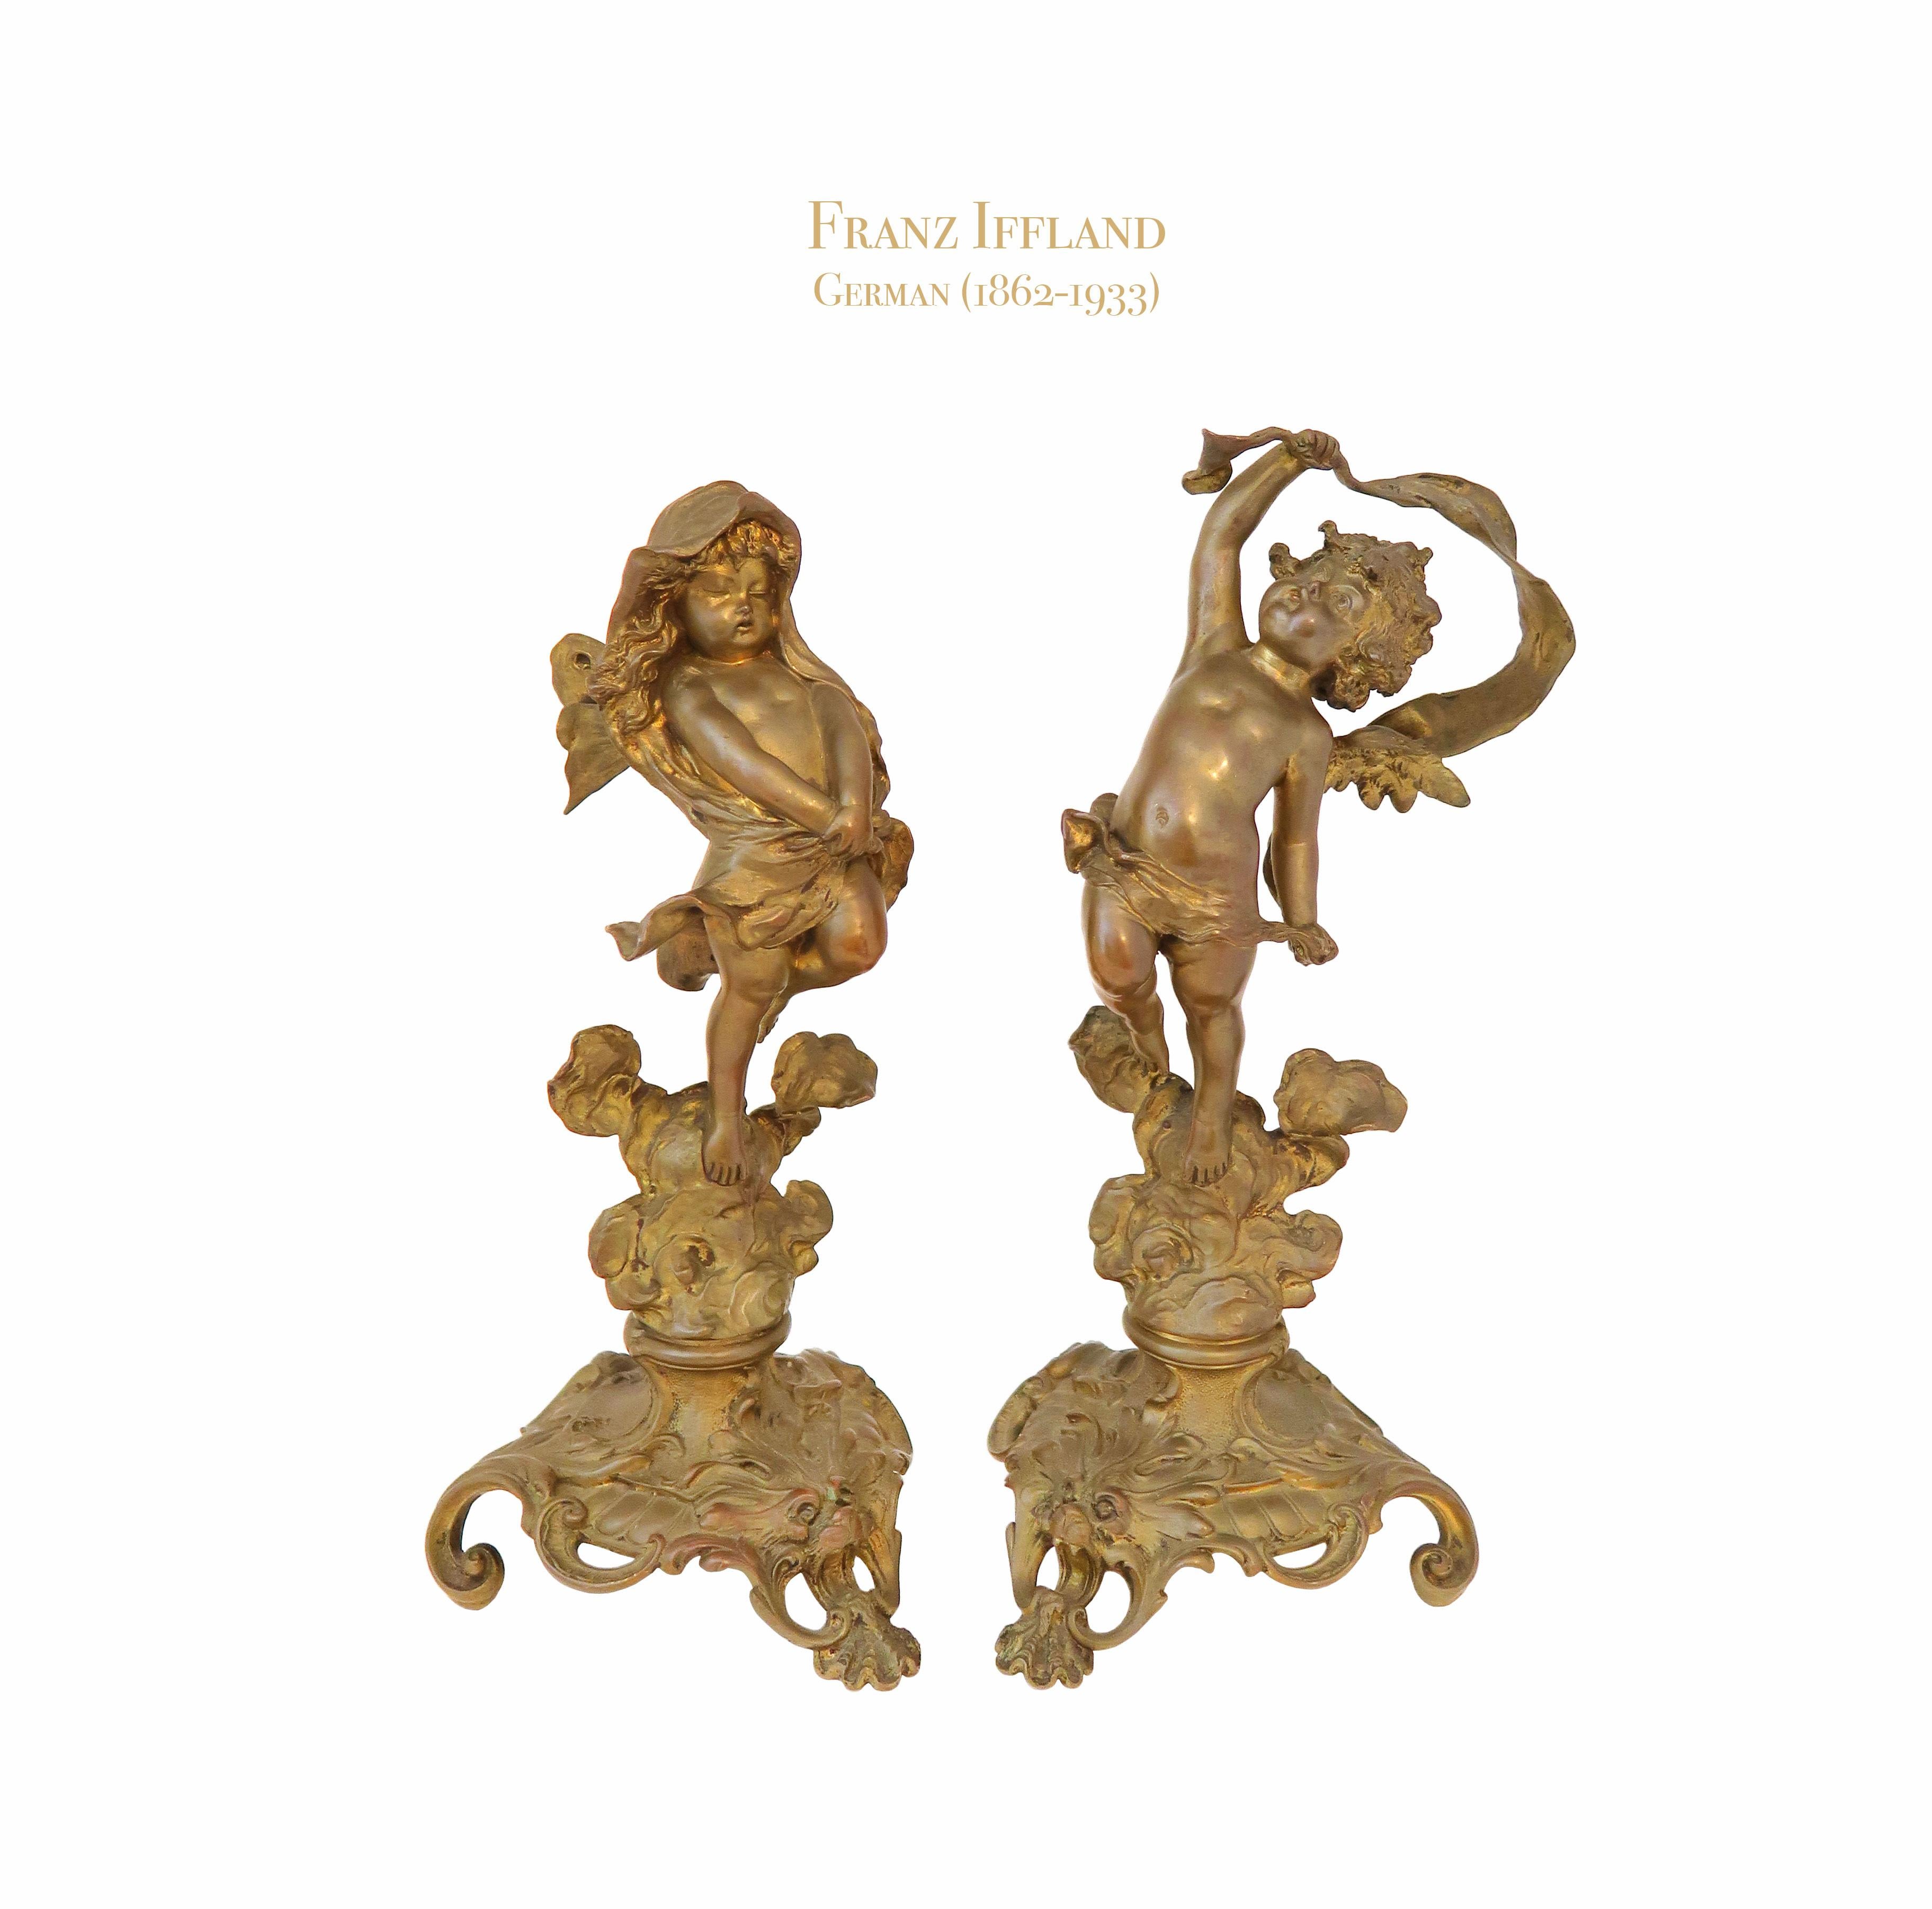 A pair of 19th C. German bronze Cupids by Franz Iffland.

Measures: 12